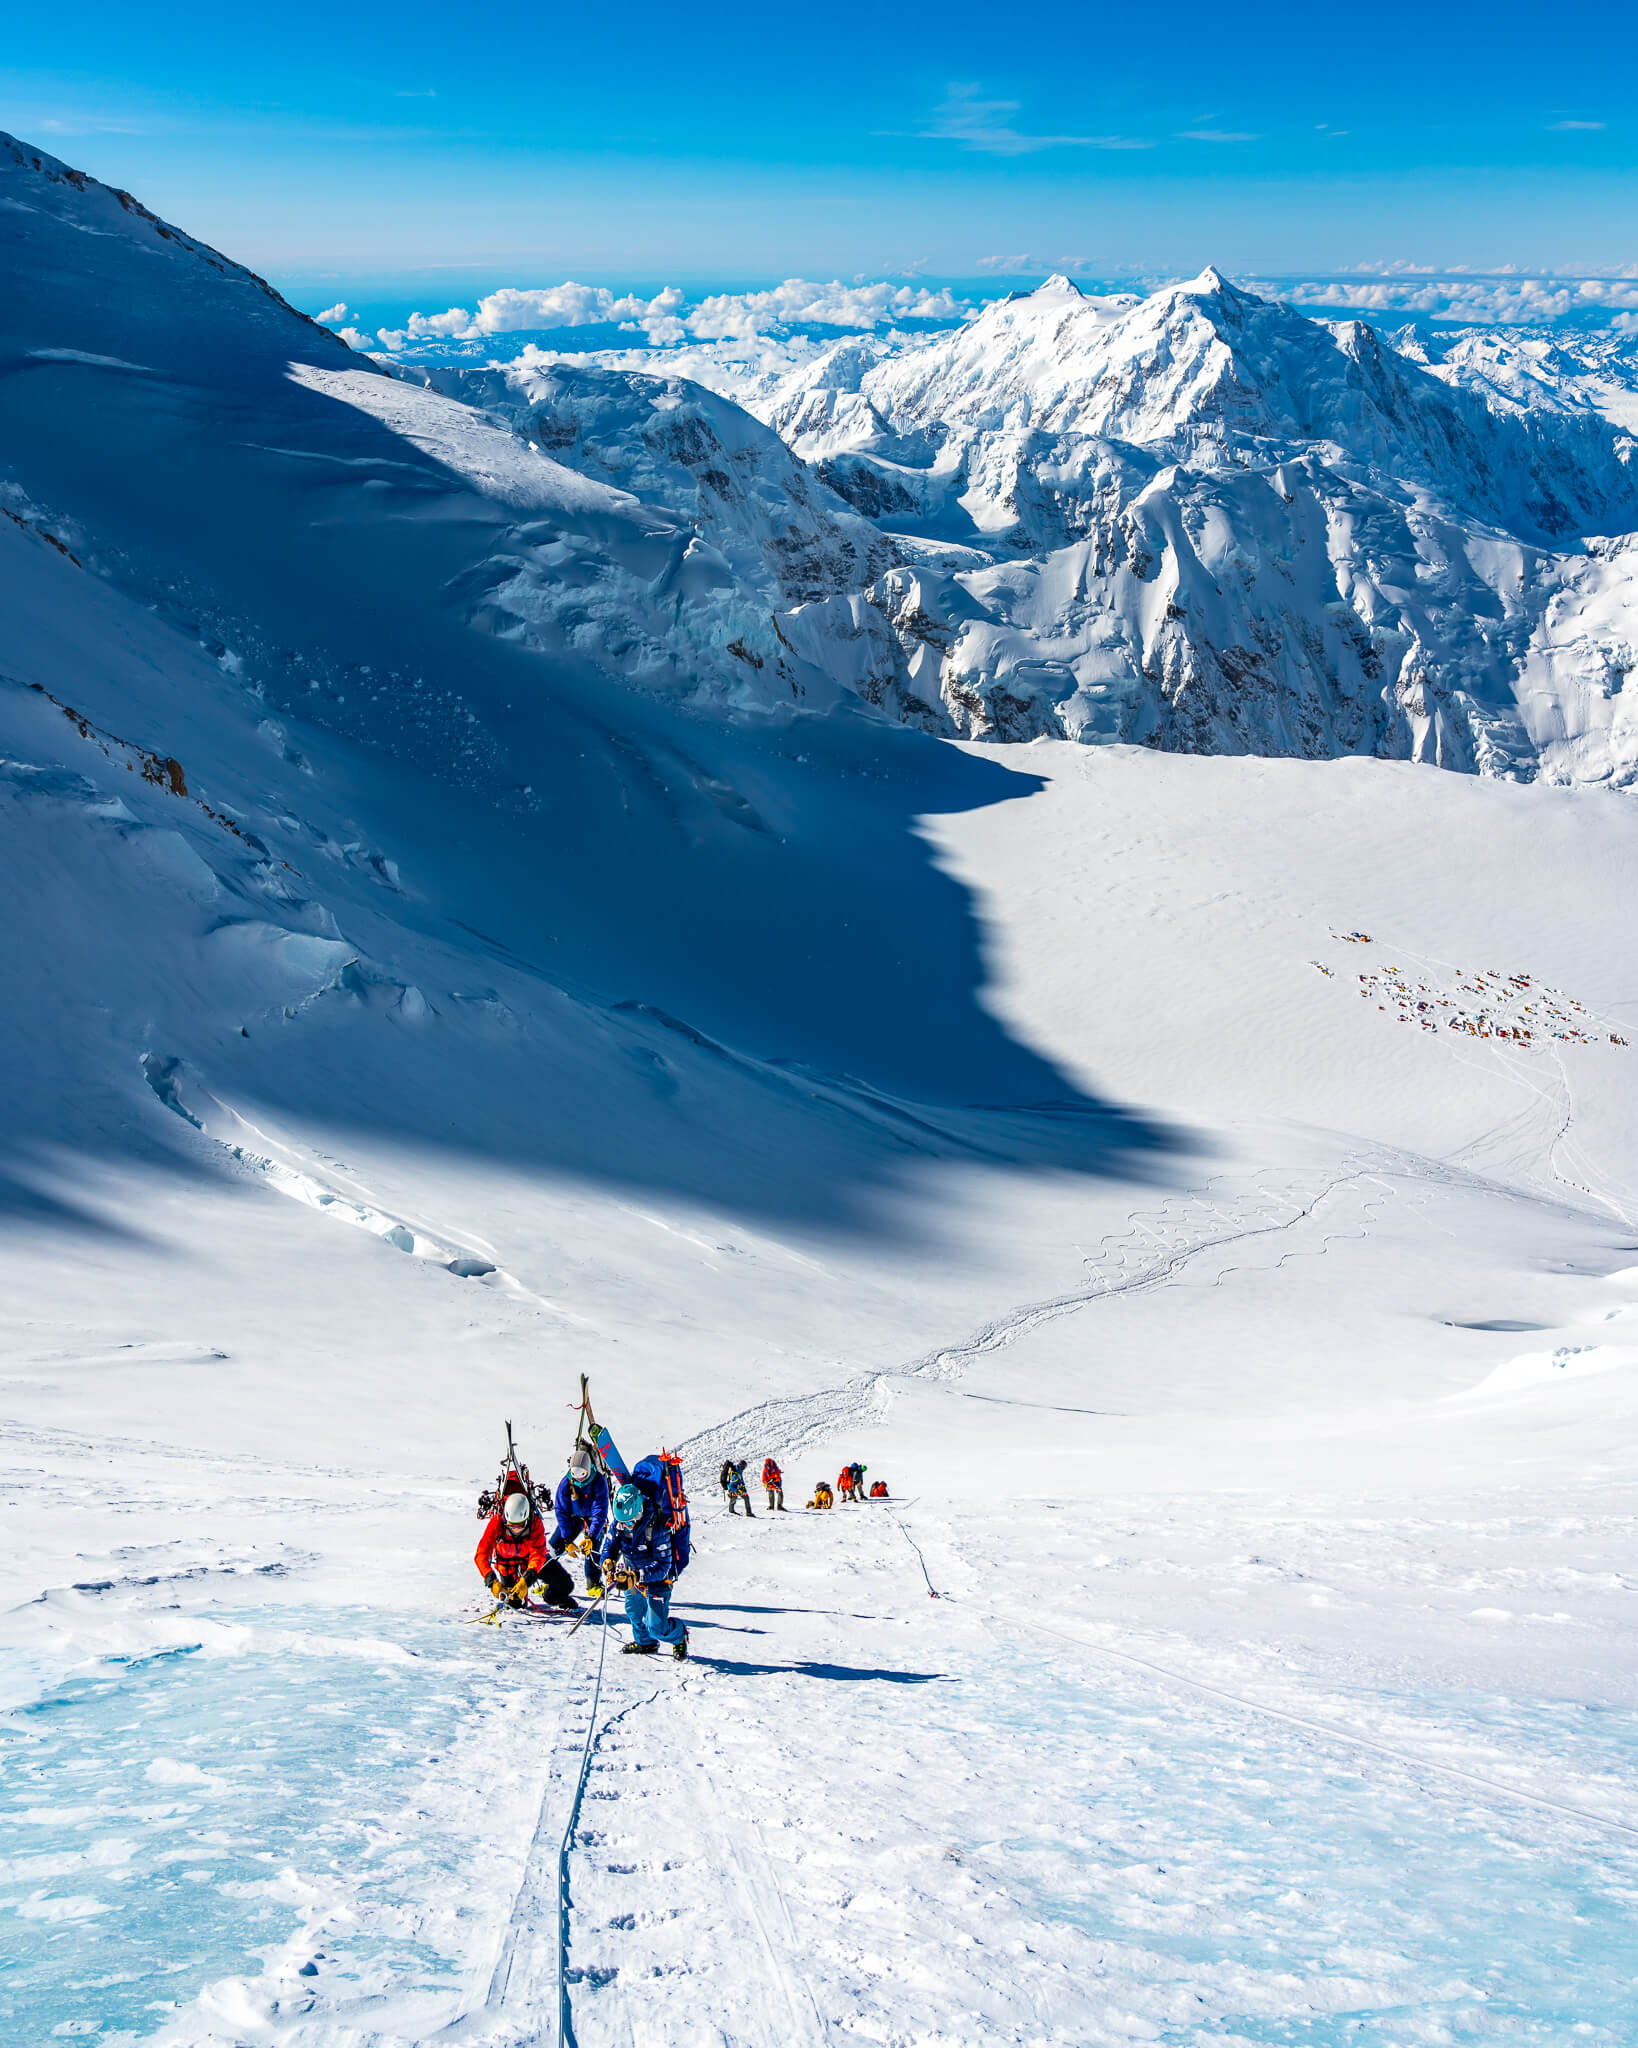 The team ascending fixed lines over blue ice, near 16,000 feet on Denali